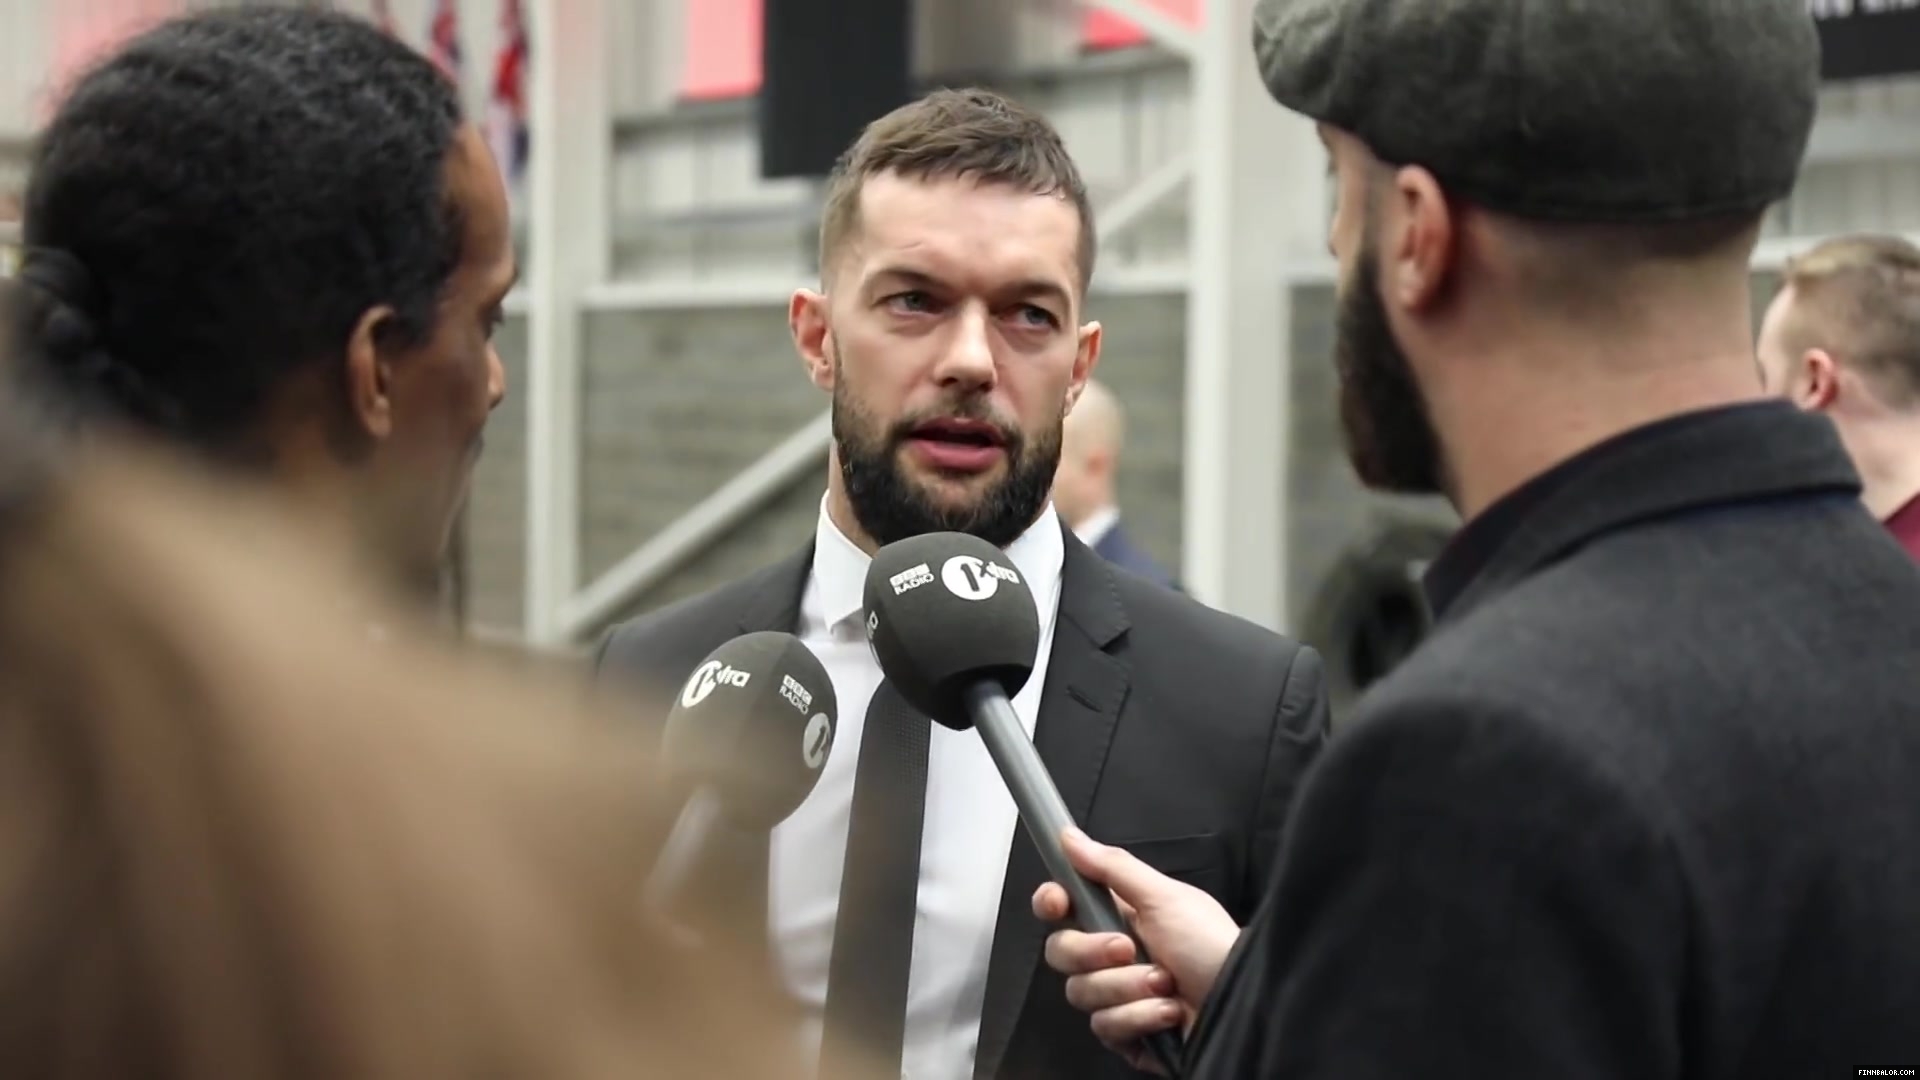 WWE_Superstar_FINN_BALOR_joins_MOUSTACHE_MOUNTAIN_at_the_opening_of_the_NXT_UK_PC_029.jpg